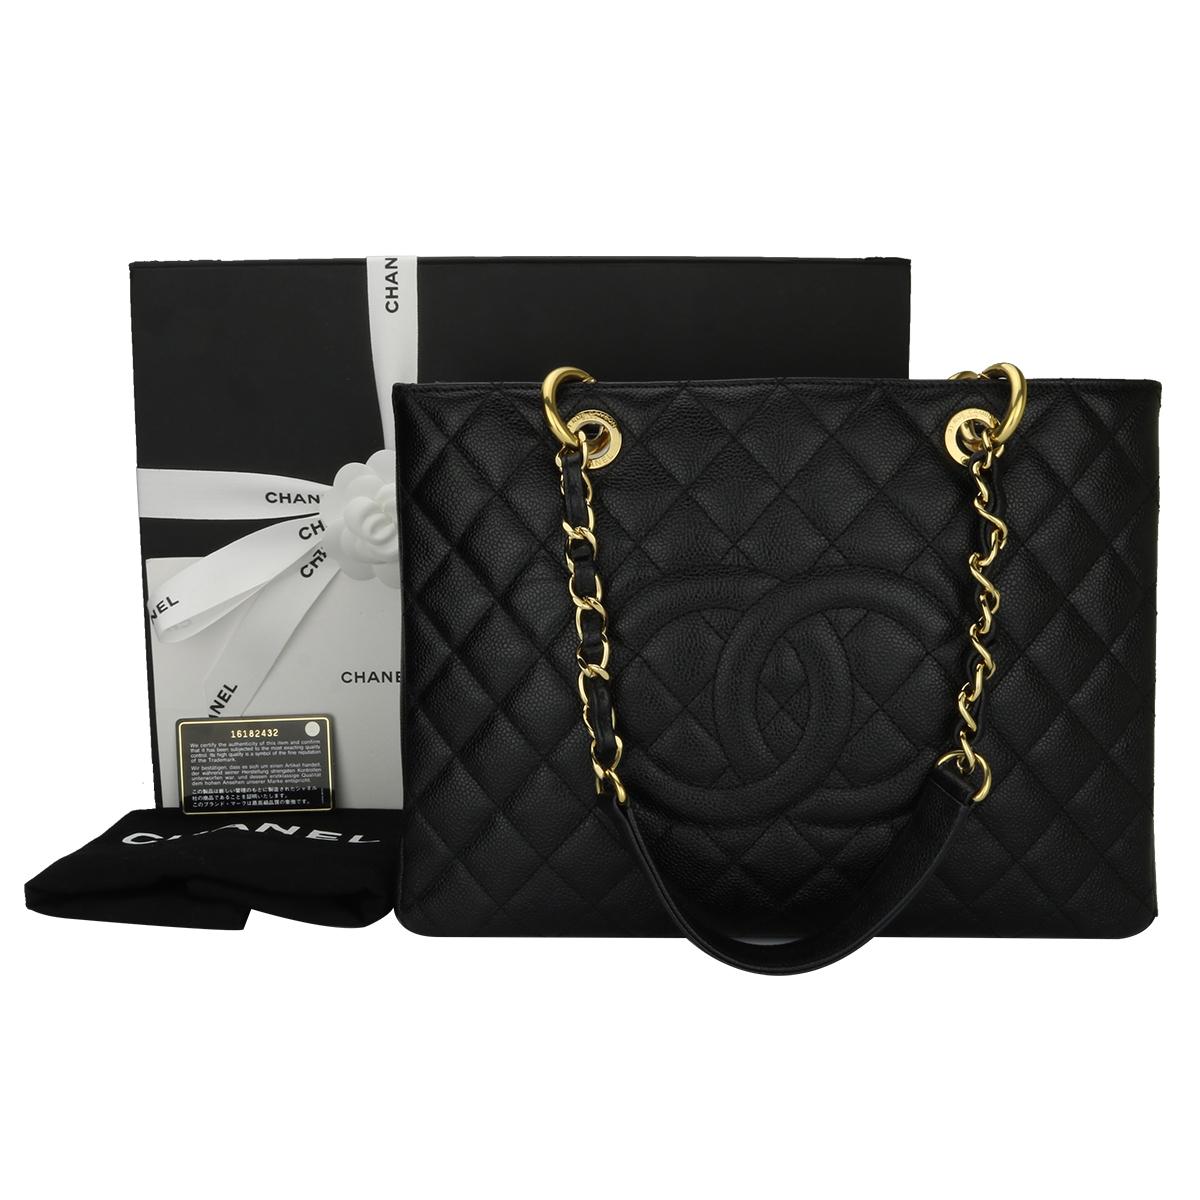 Authentic CHANEL Grand Shopping Tote (GST) Black Caviar with Gold Hardware 2012.

This bag is in a mint condition, the bag still holds its shape well, and the hardware is very shiny.

Exterior Condition: Excellent condition, corners show no visible